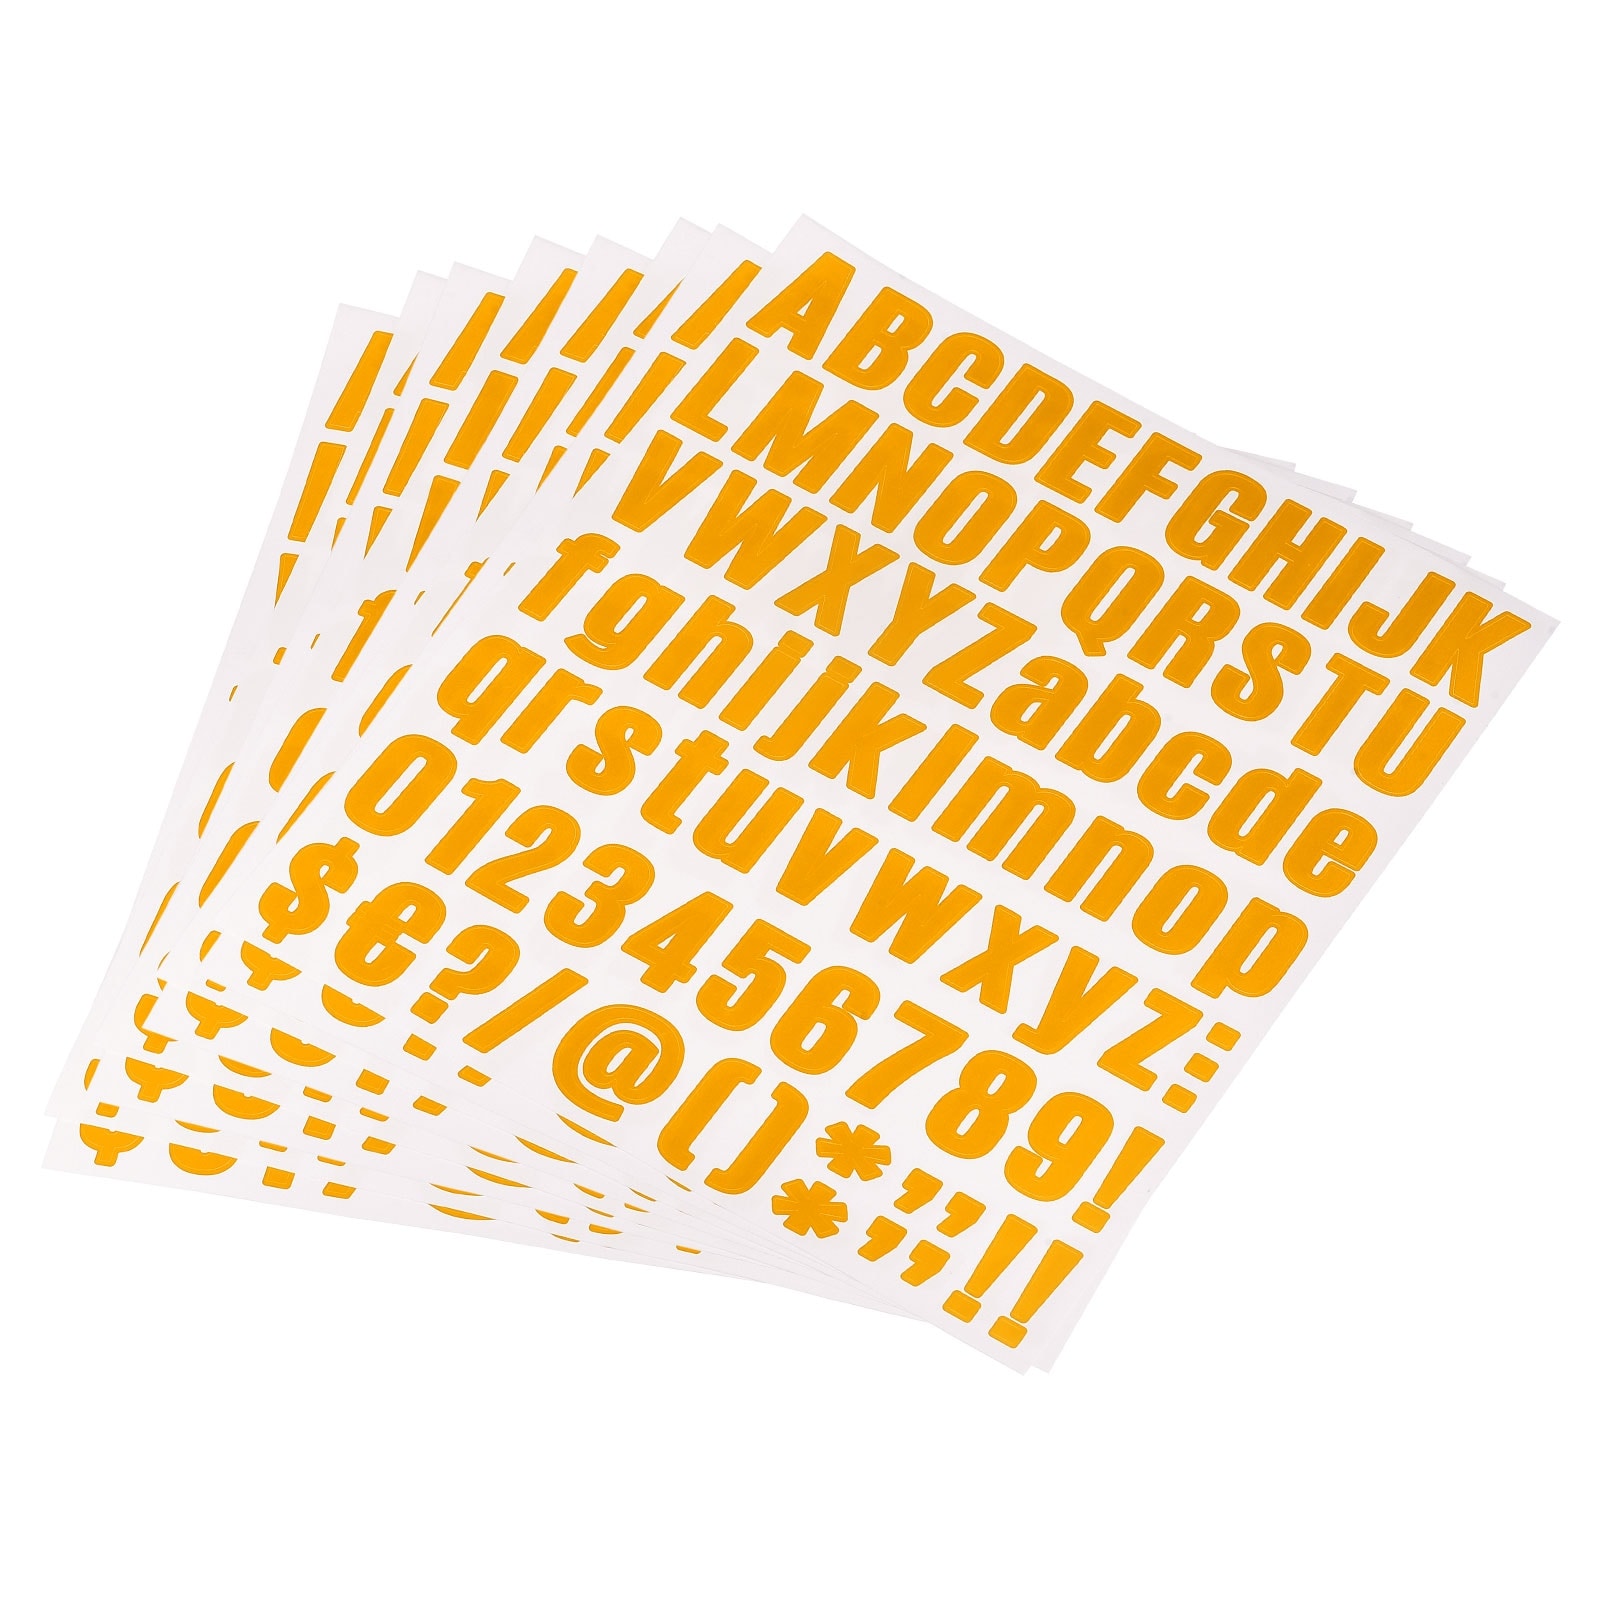 Stencil Font Self-adhesive Vinyl Letter and Number Stickers, Suitable for  Indoor and Outdoor Use. 